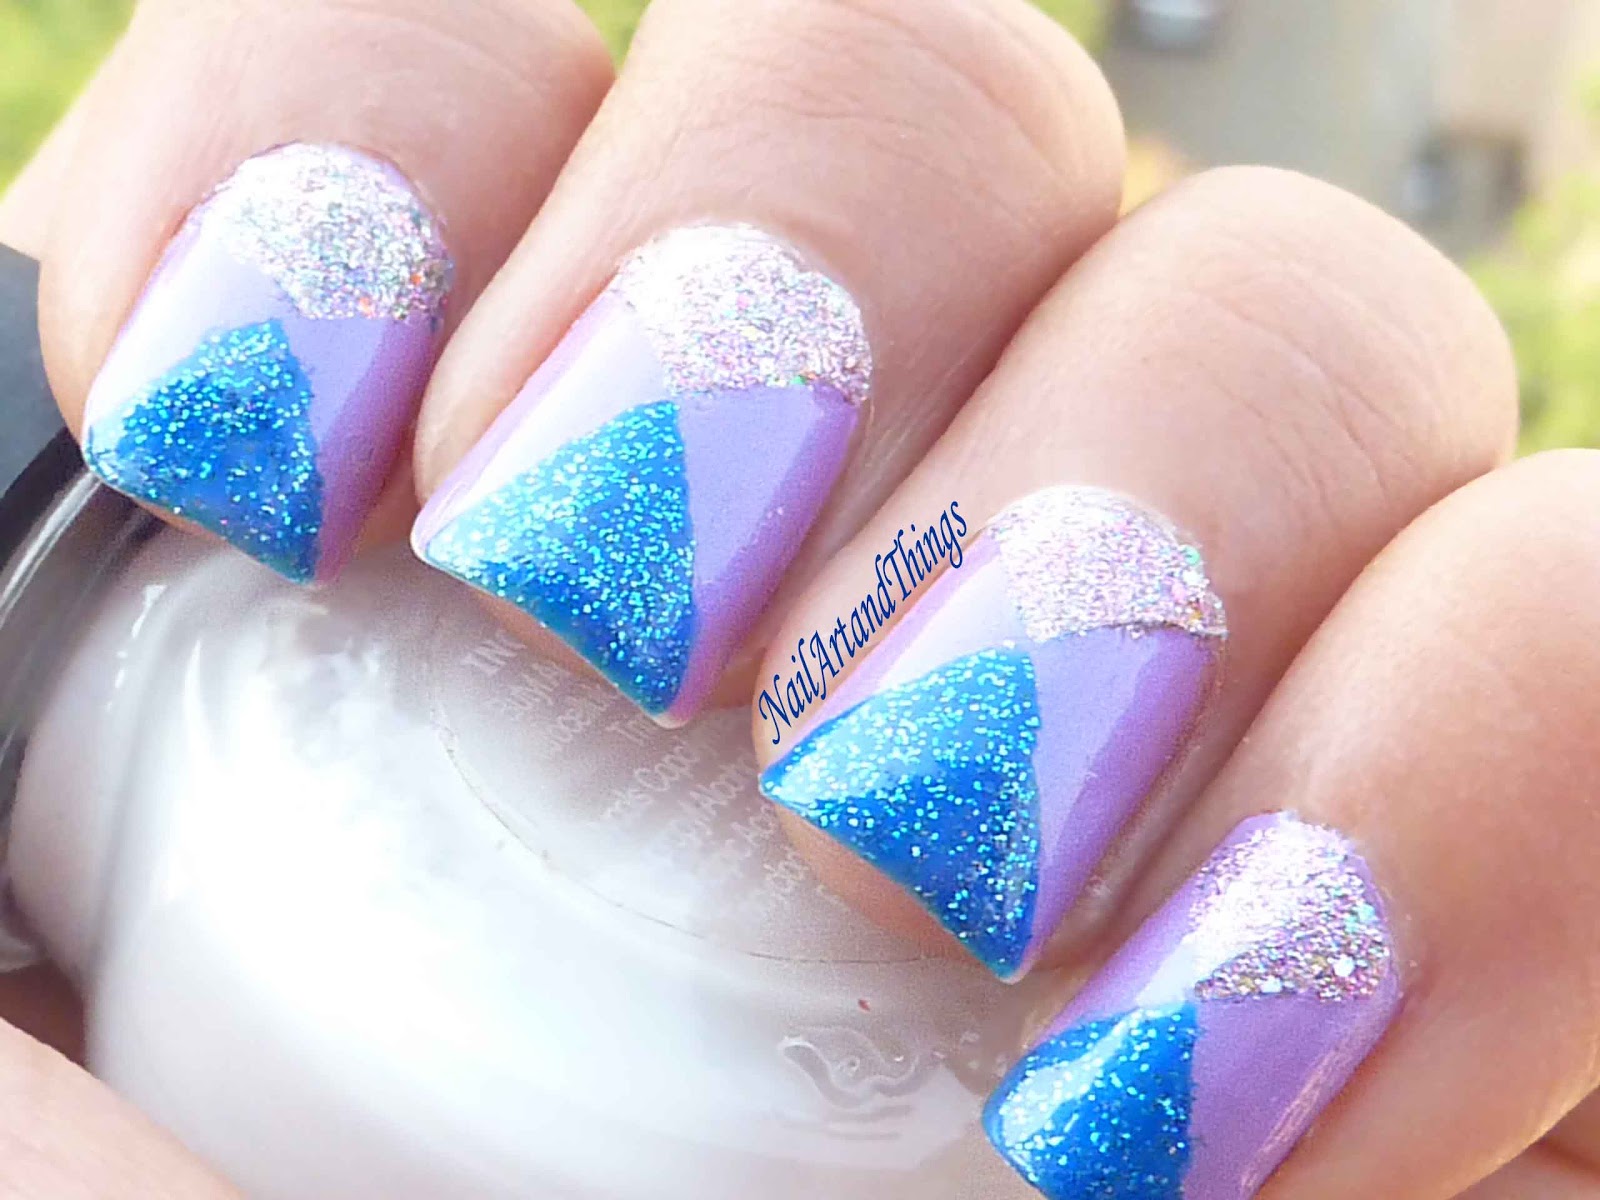 4. Holographic Nail Art Tape - wide 3